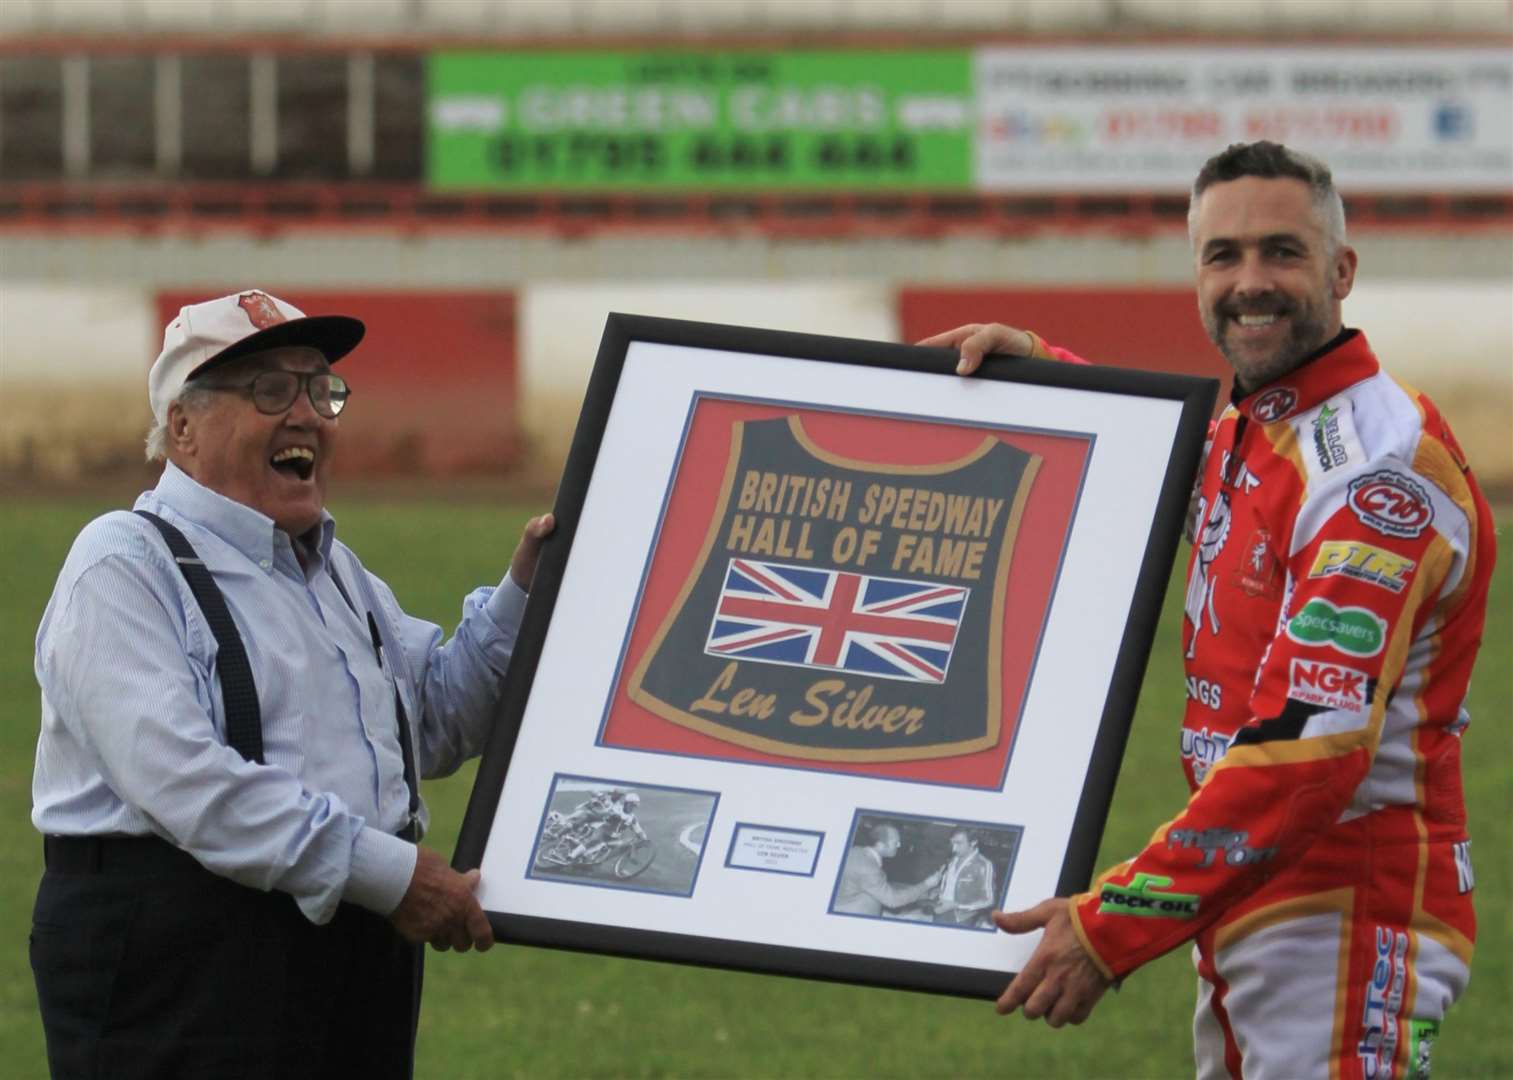 Len Silver with Scott Nicholls being presented with his Hall of Fame vest Picture: Geoff Young